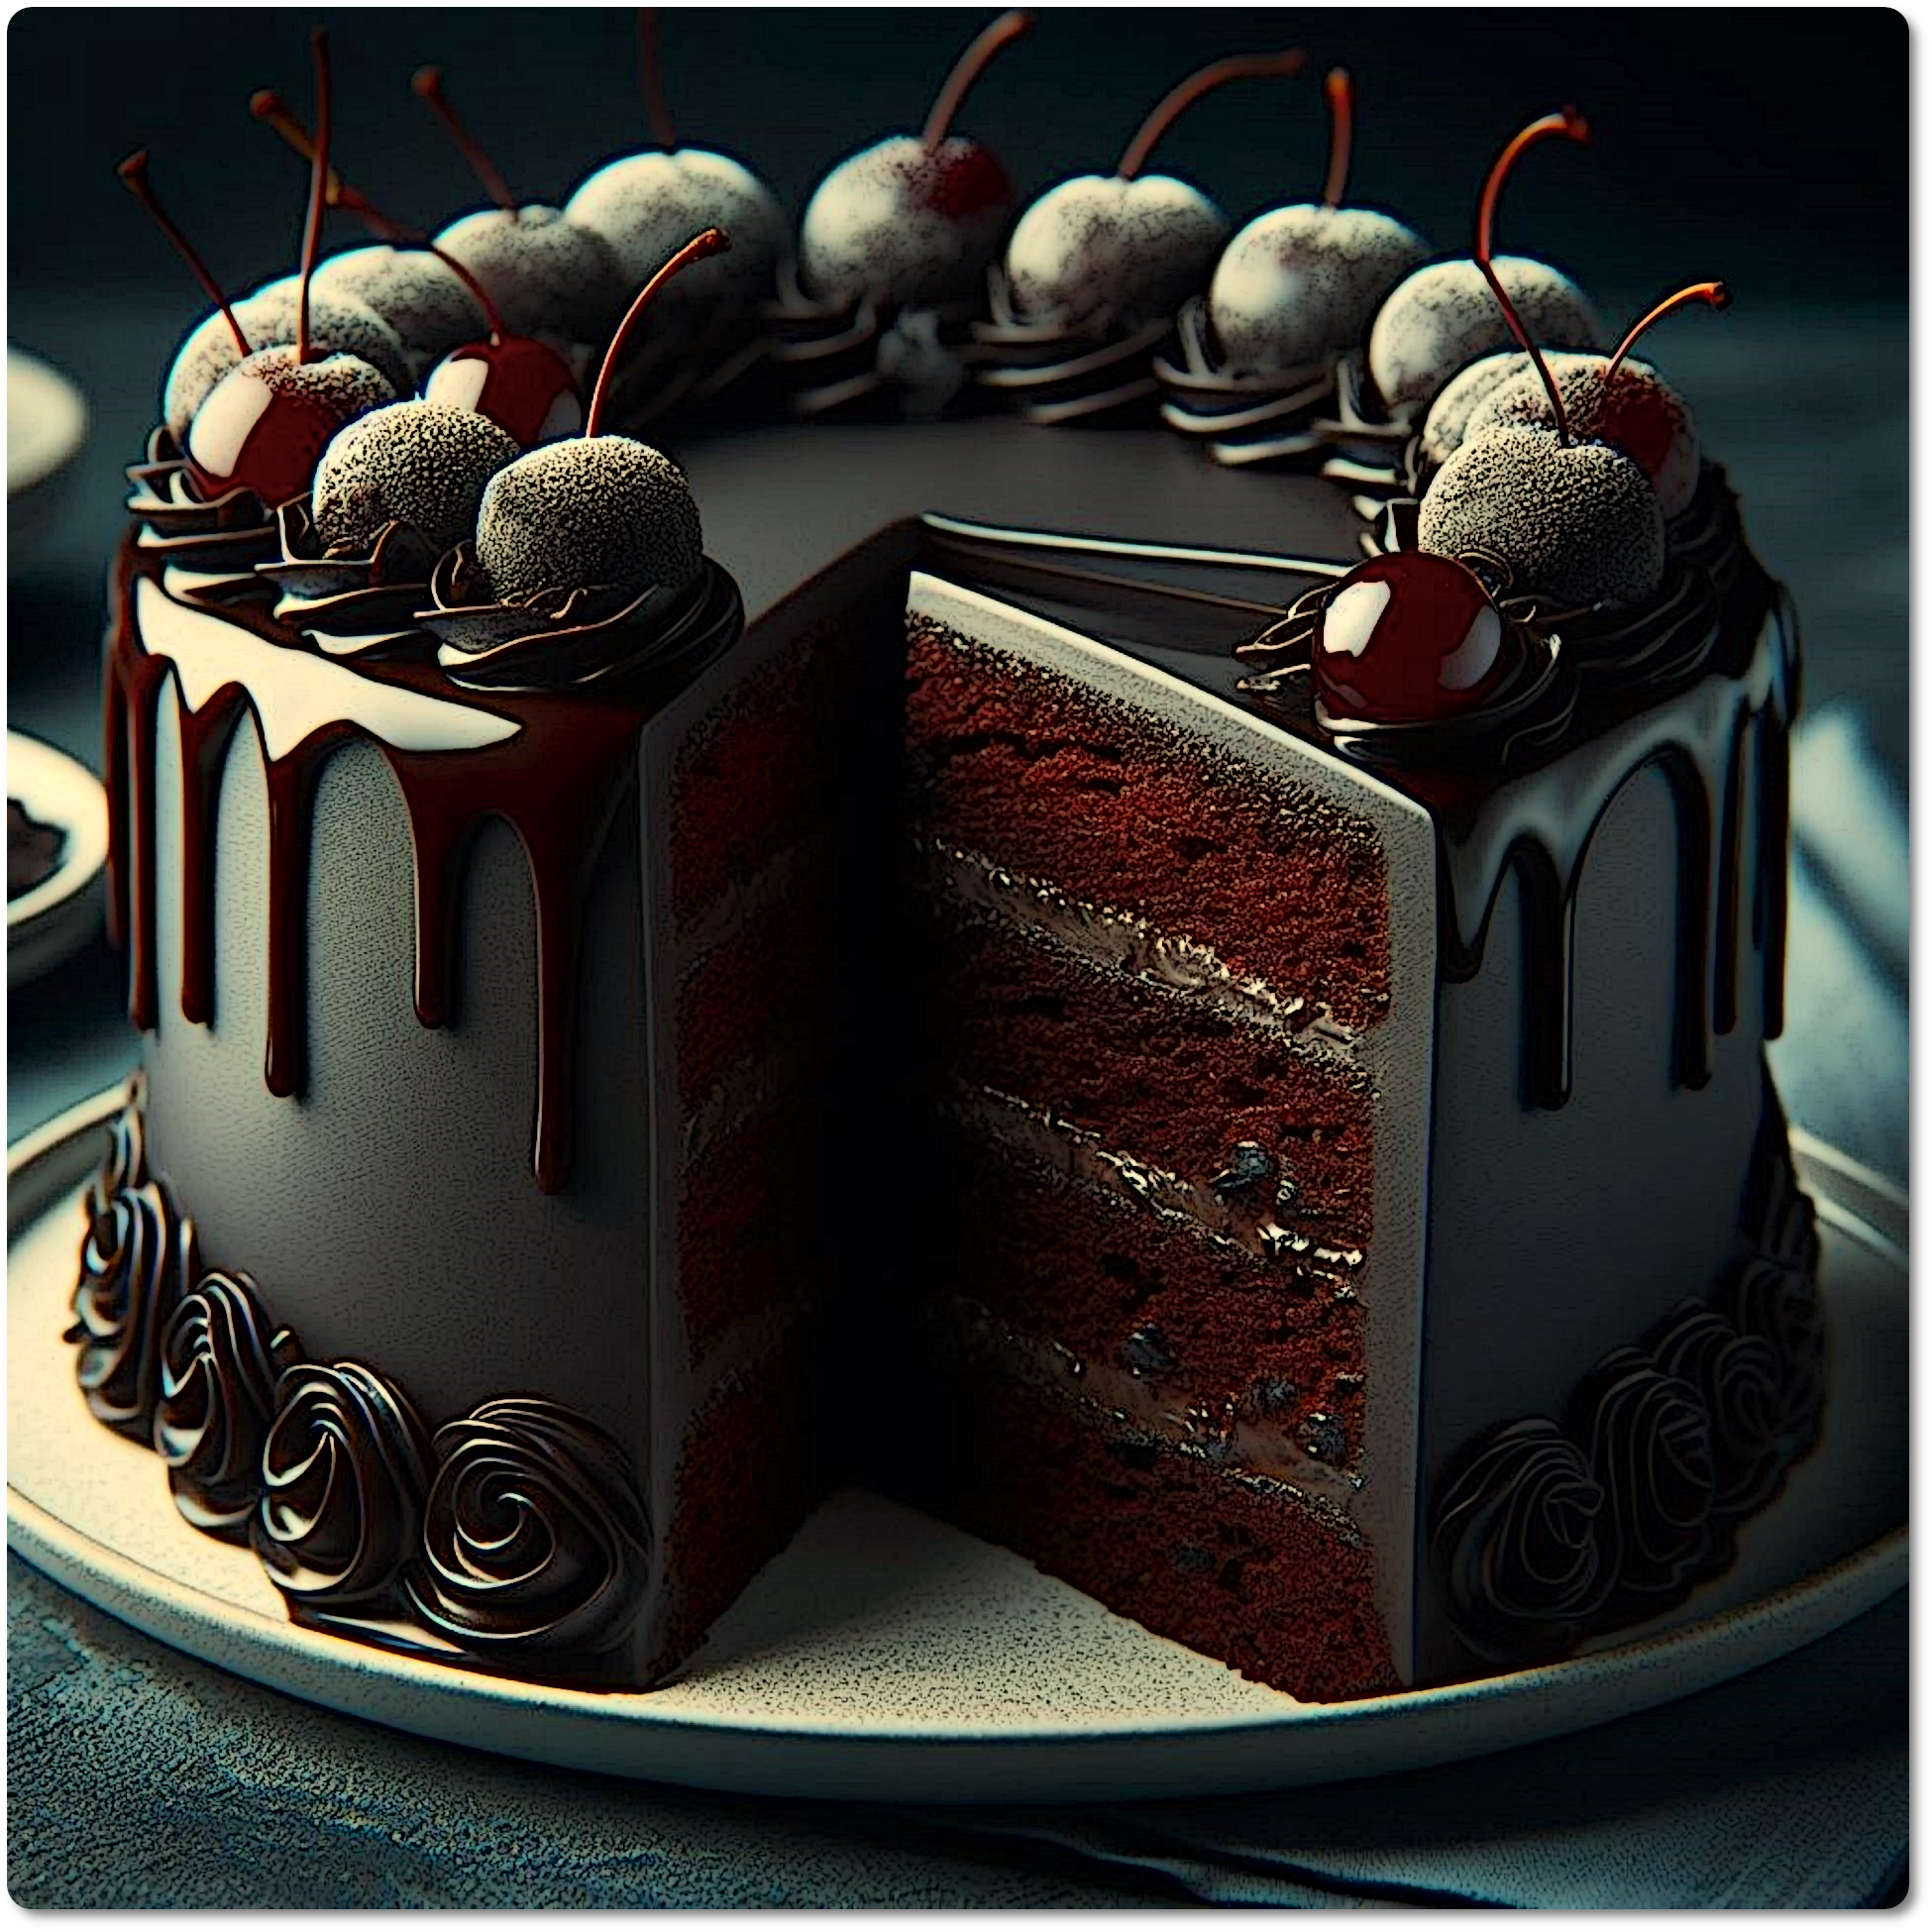 I found out this morning that my cousin is dying. She's been quite sick for the last few years so I'm thinking of her passing as more of a release than a curse. When I Think 'Heather', I think Black Forest Cake. She made them, tall, sloppy and decadent. Go gently Heather.